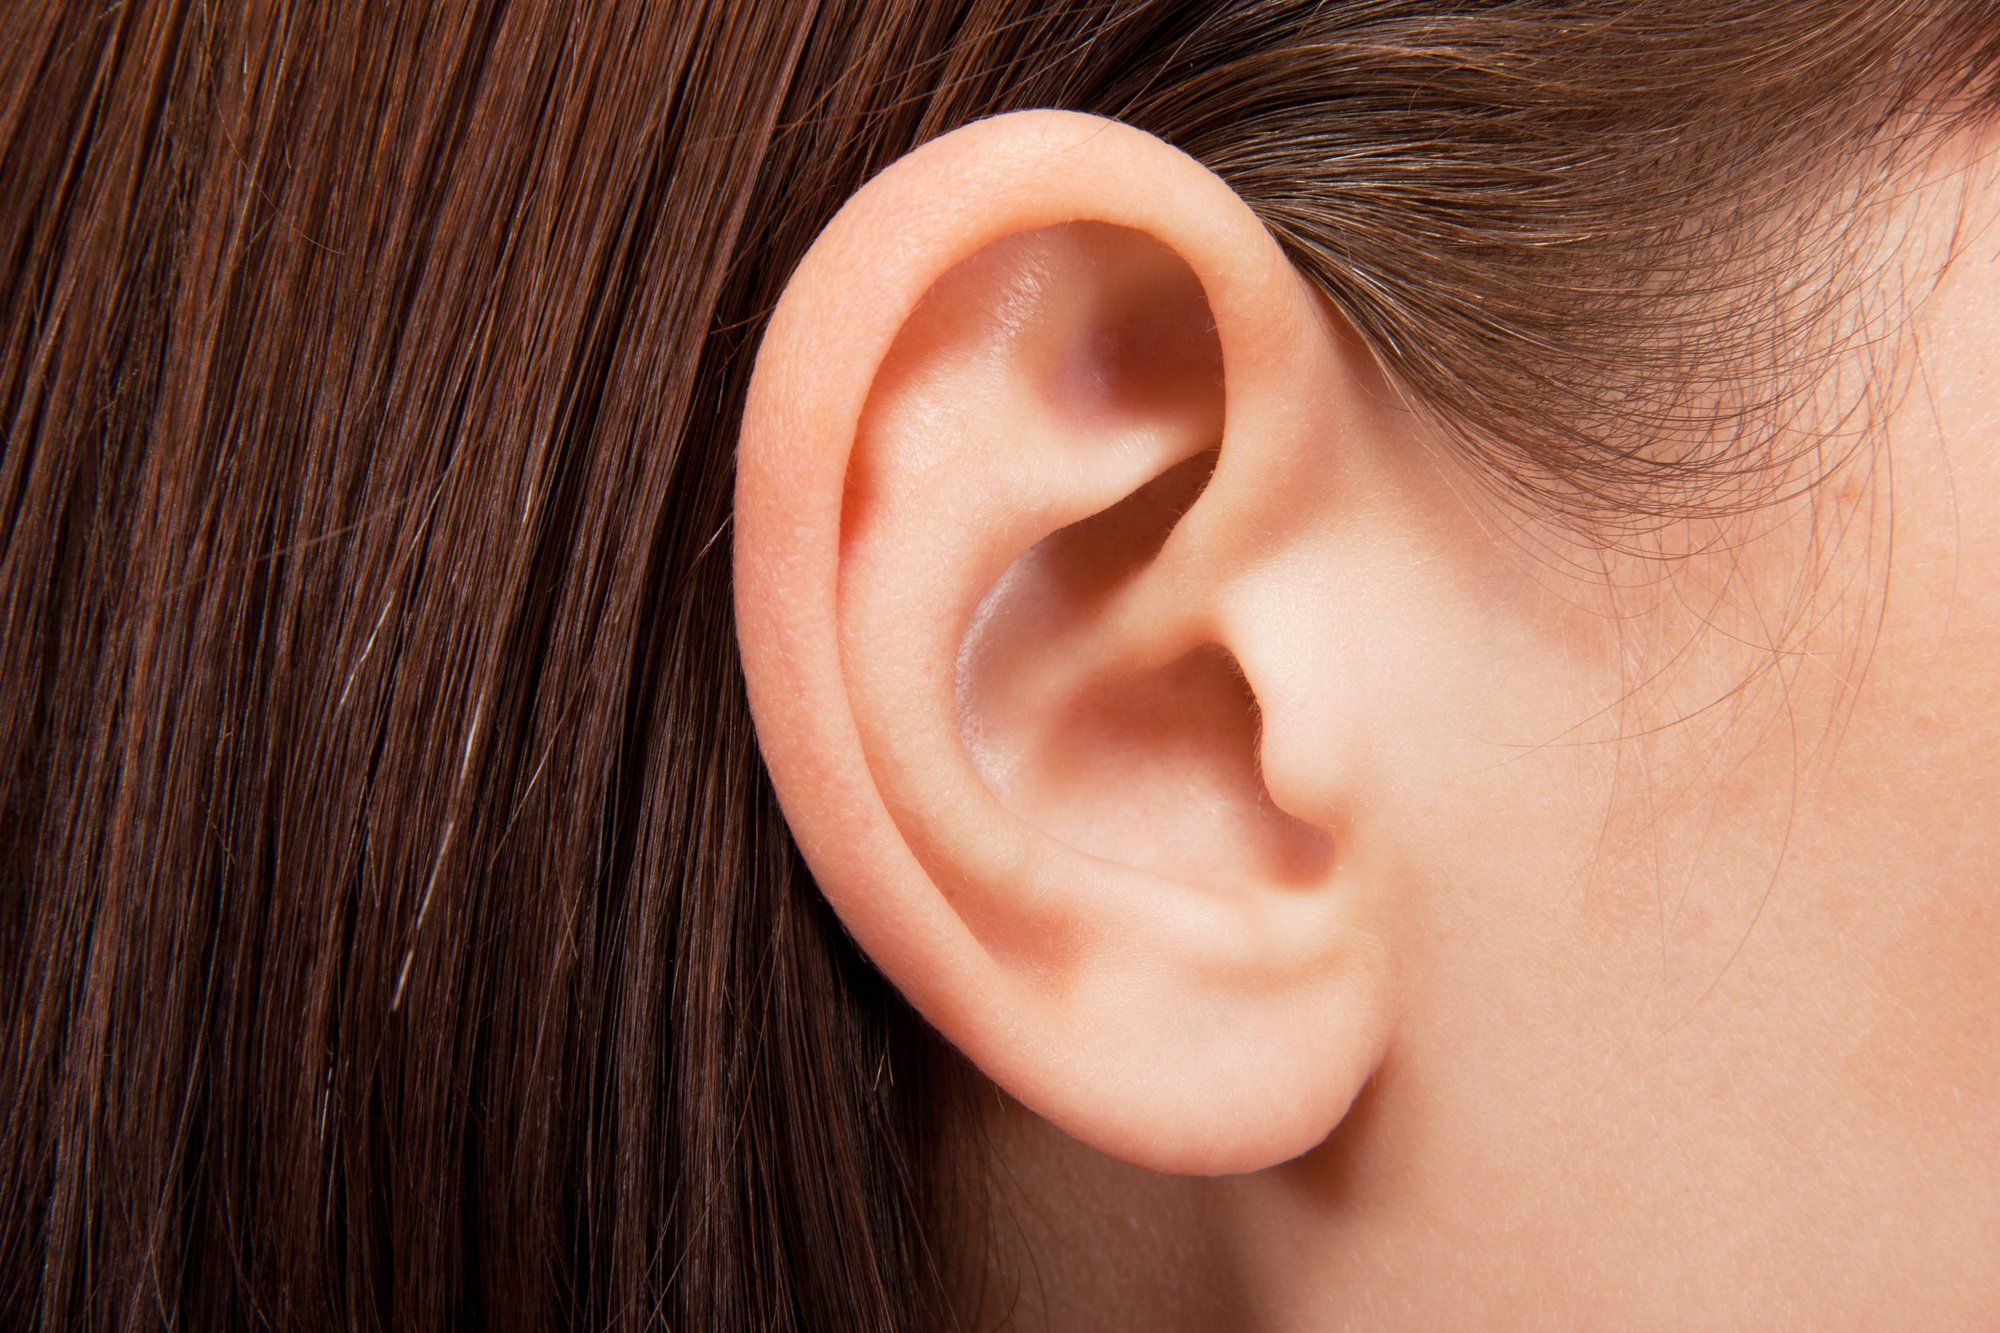 If you are experiencing partial hearing loss or ringing in your ears, you might need to get your ears cleaned. Learn how often to do this here.